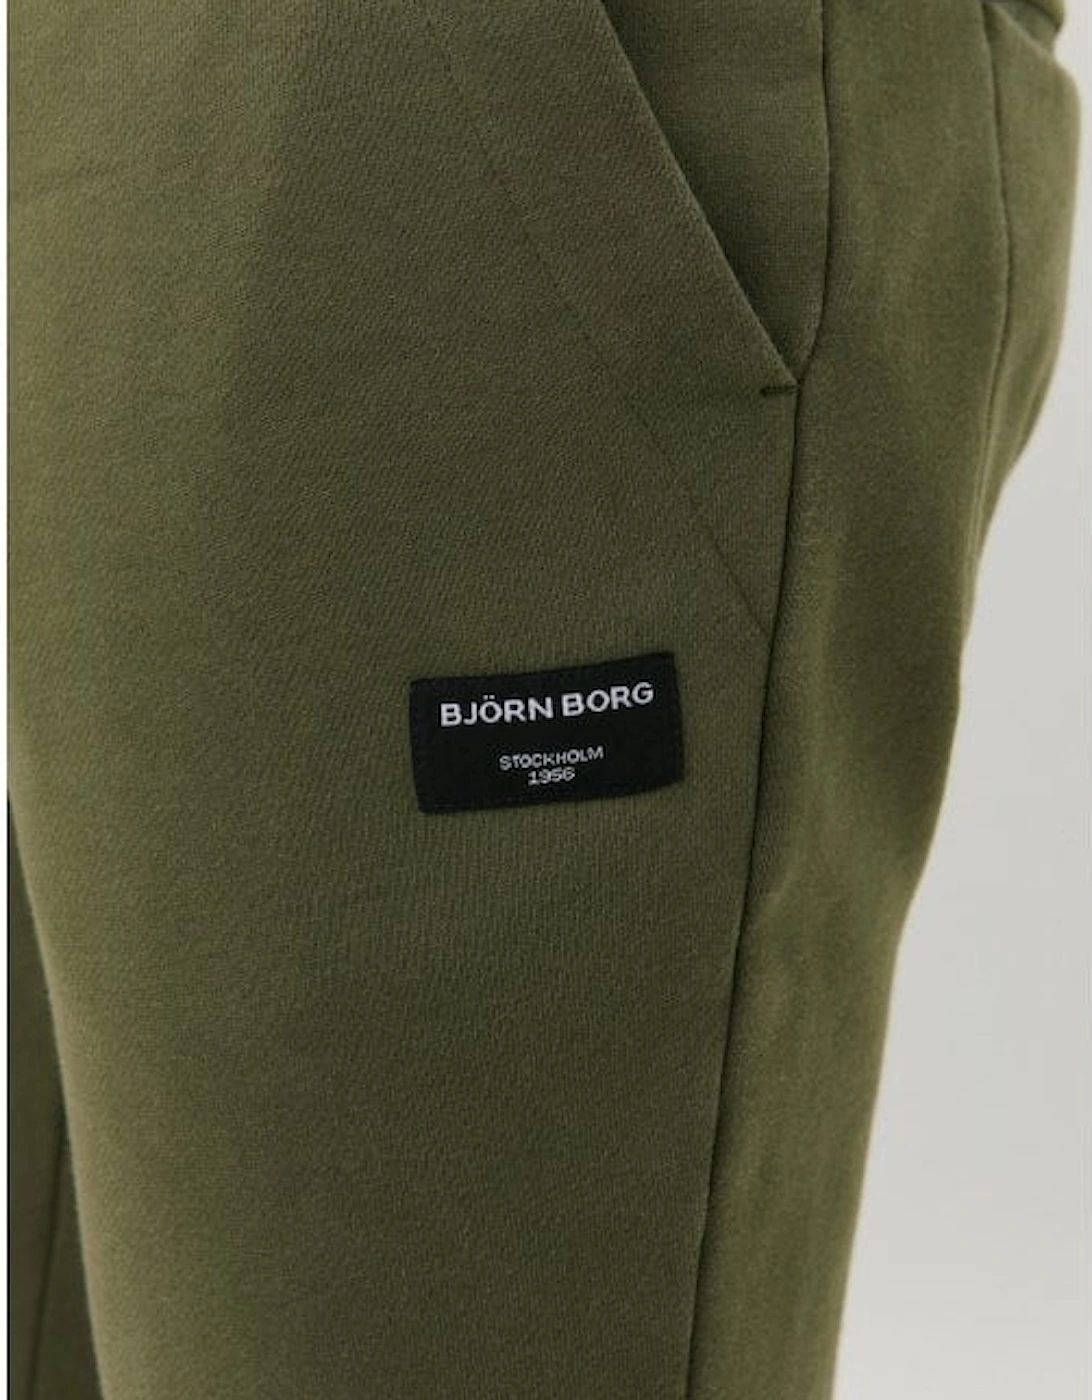 Centre Tracksuit Tapered Jogging Bottoms, Ivy Green